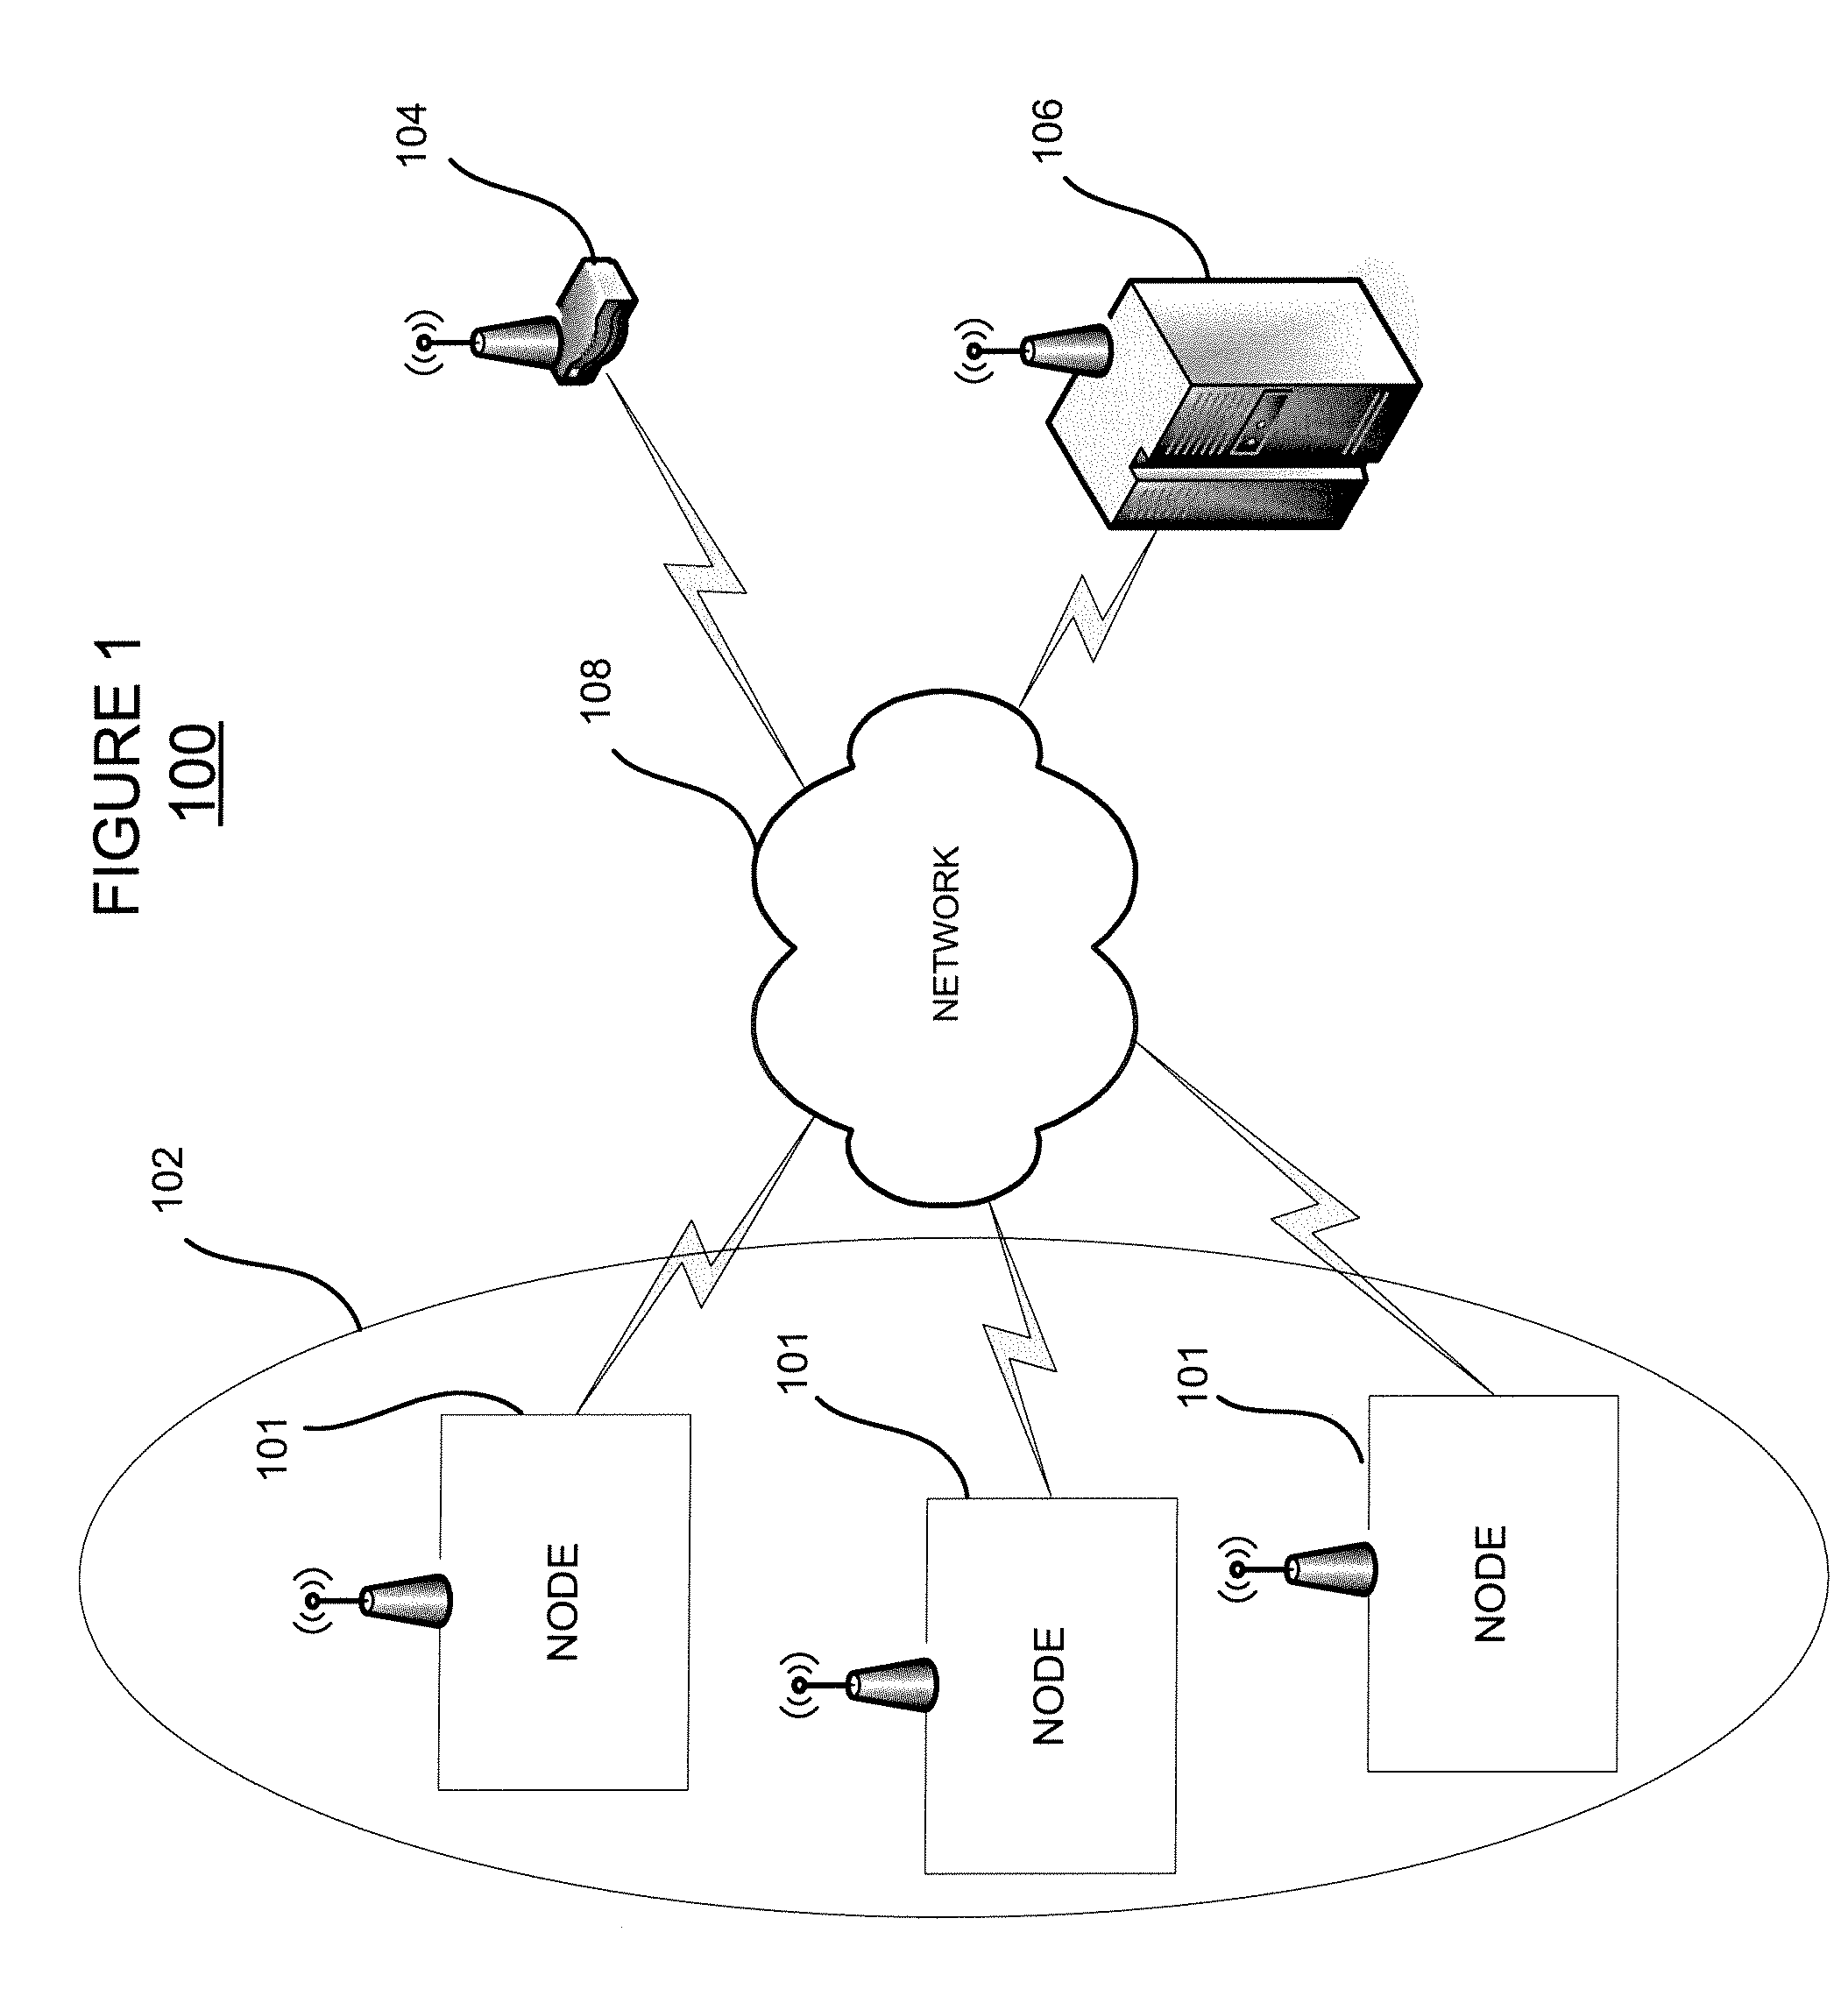 Remote monitoring and control system comprising mesh and time synchronization technology